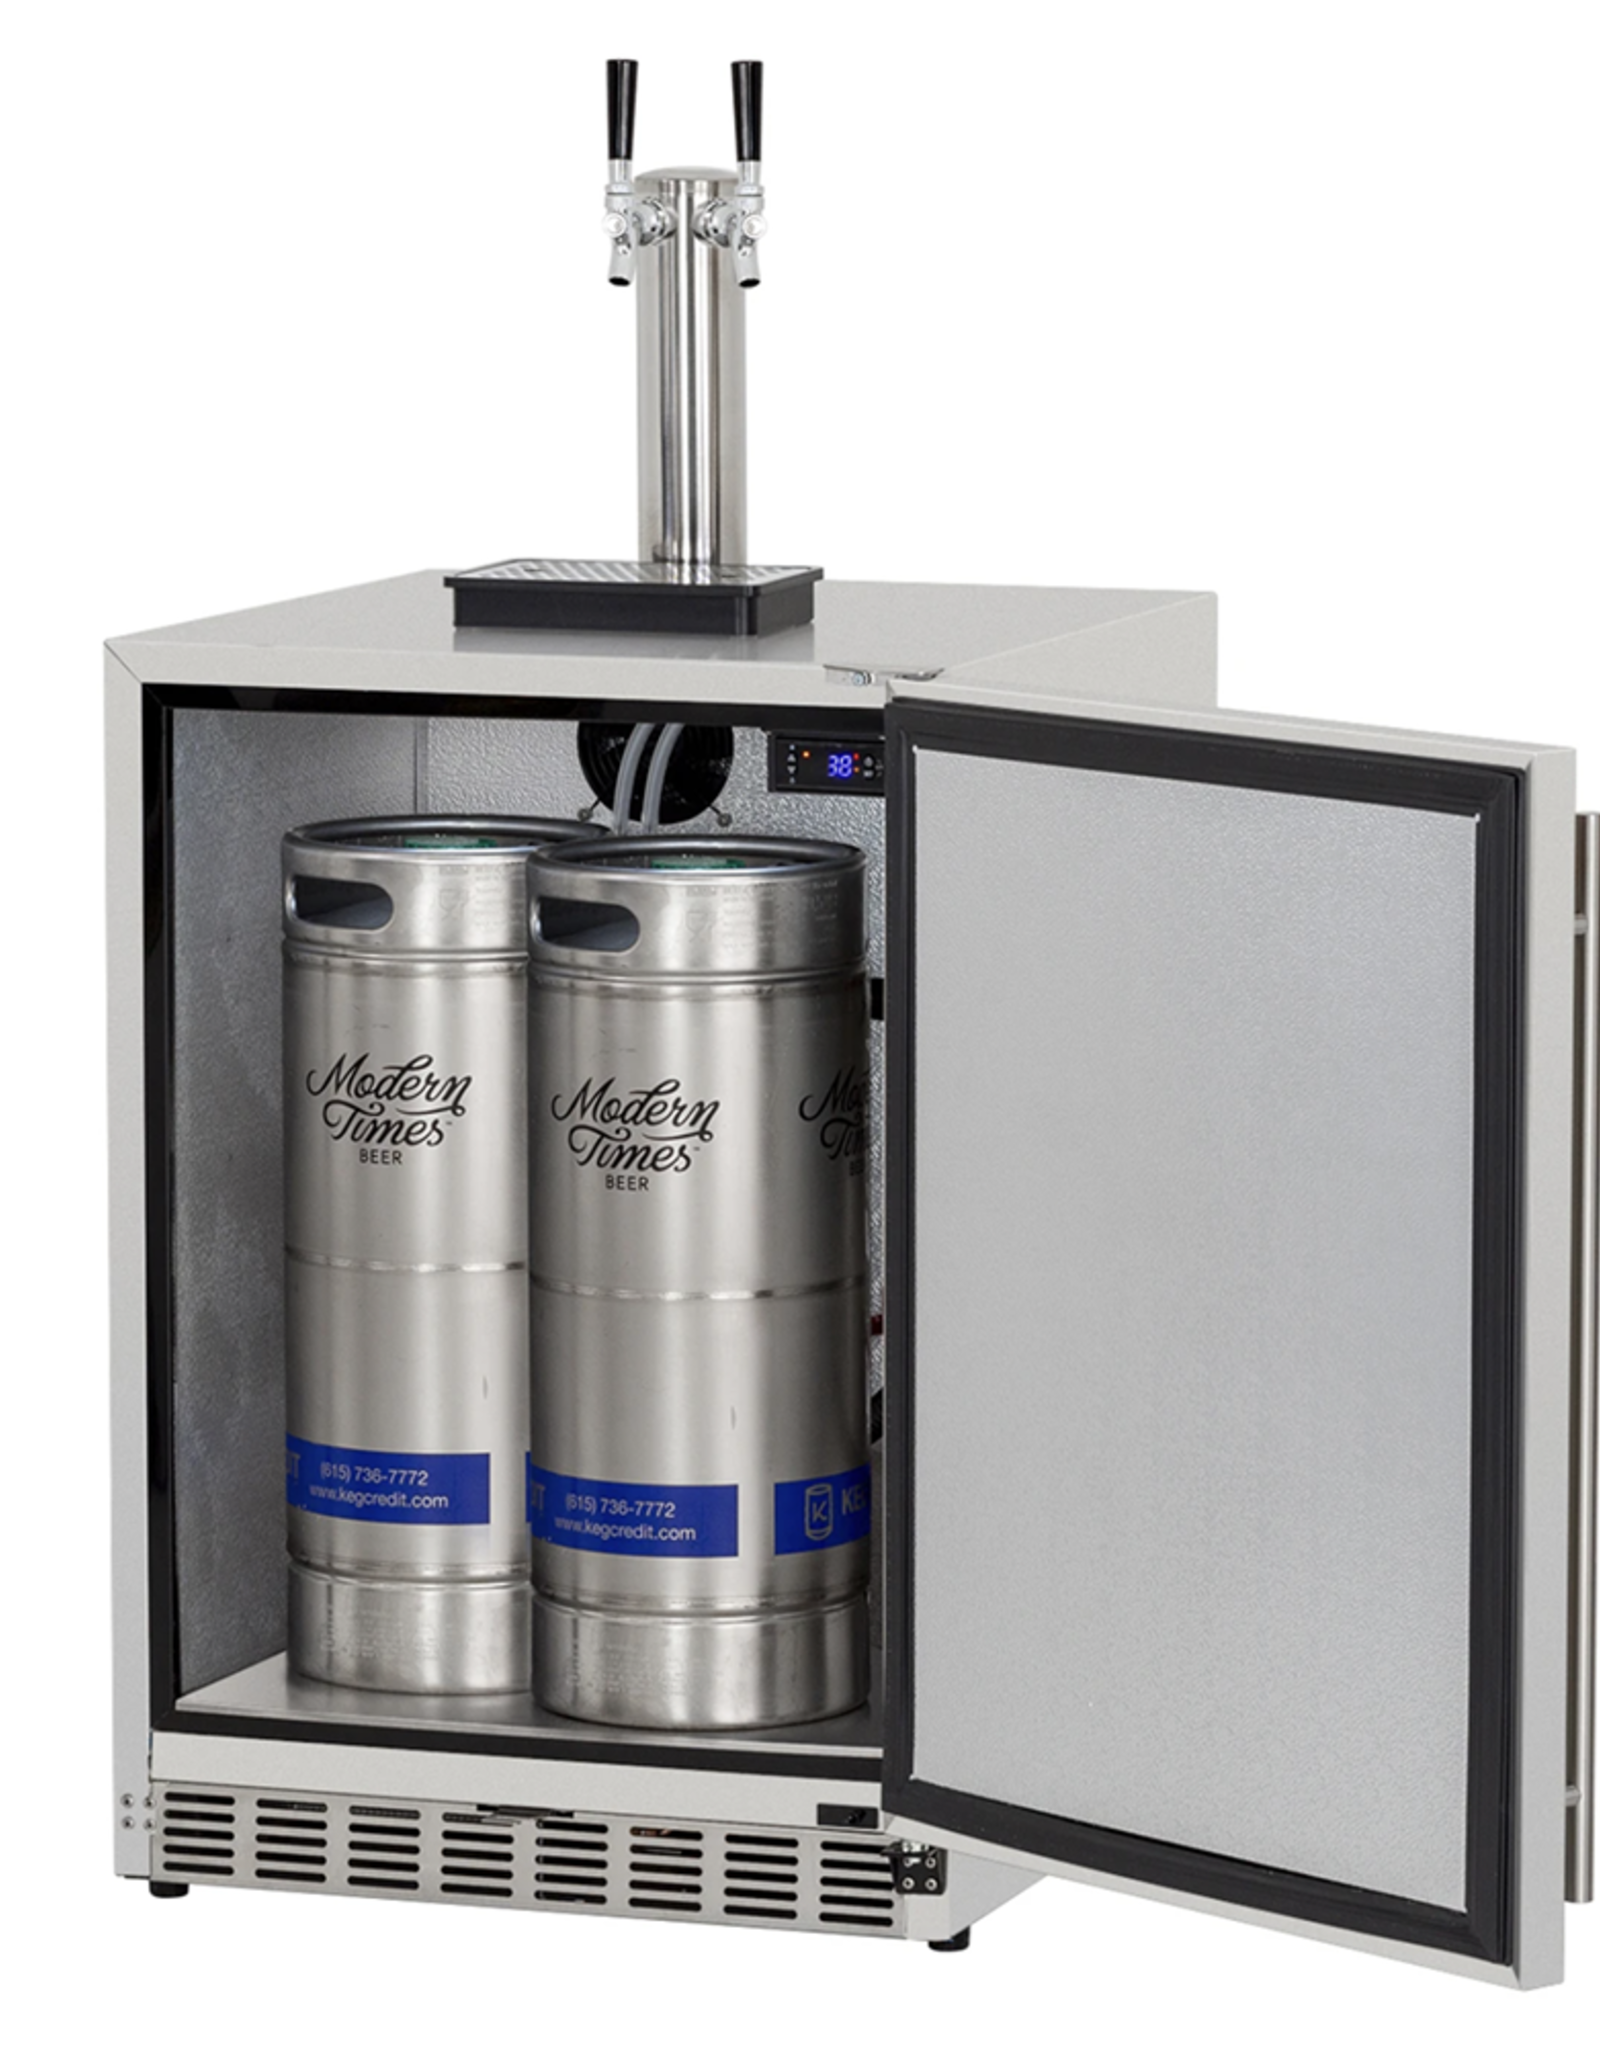 Renaissance Cooking Systems The Double Tap Outdoor Kegerator - REFR6